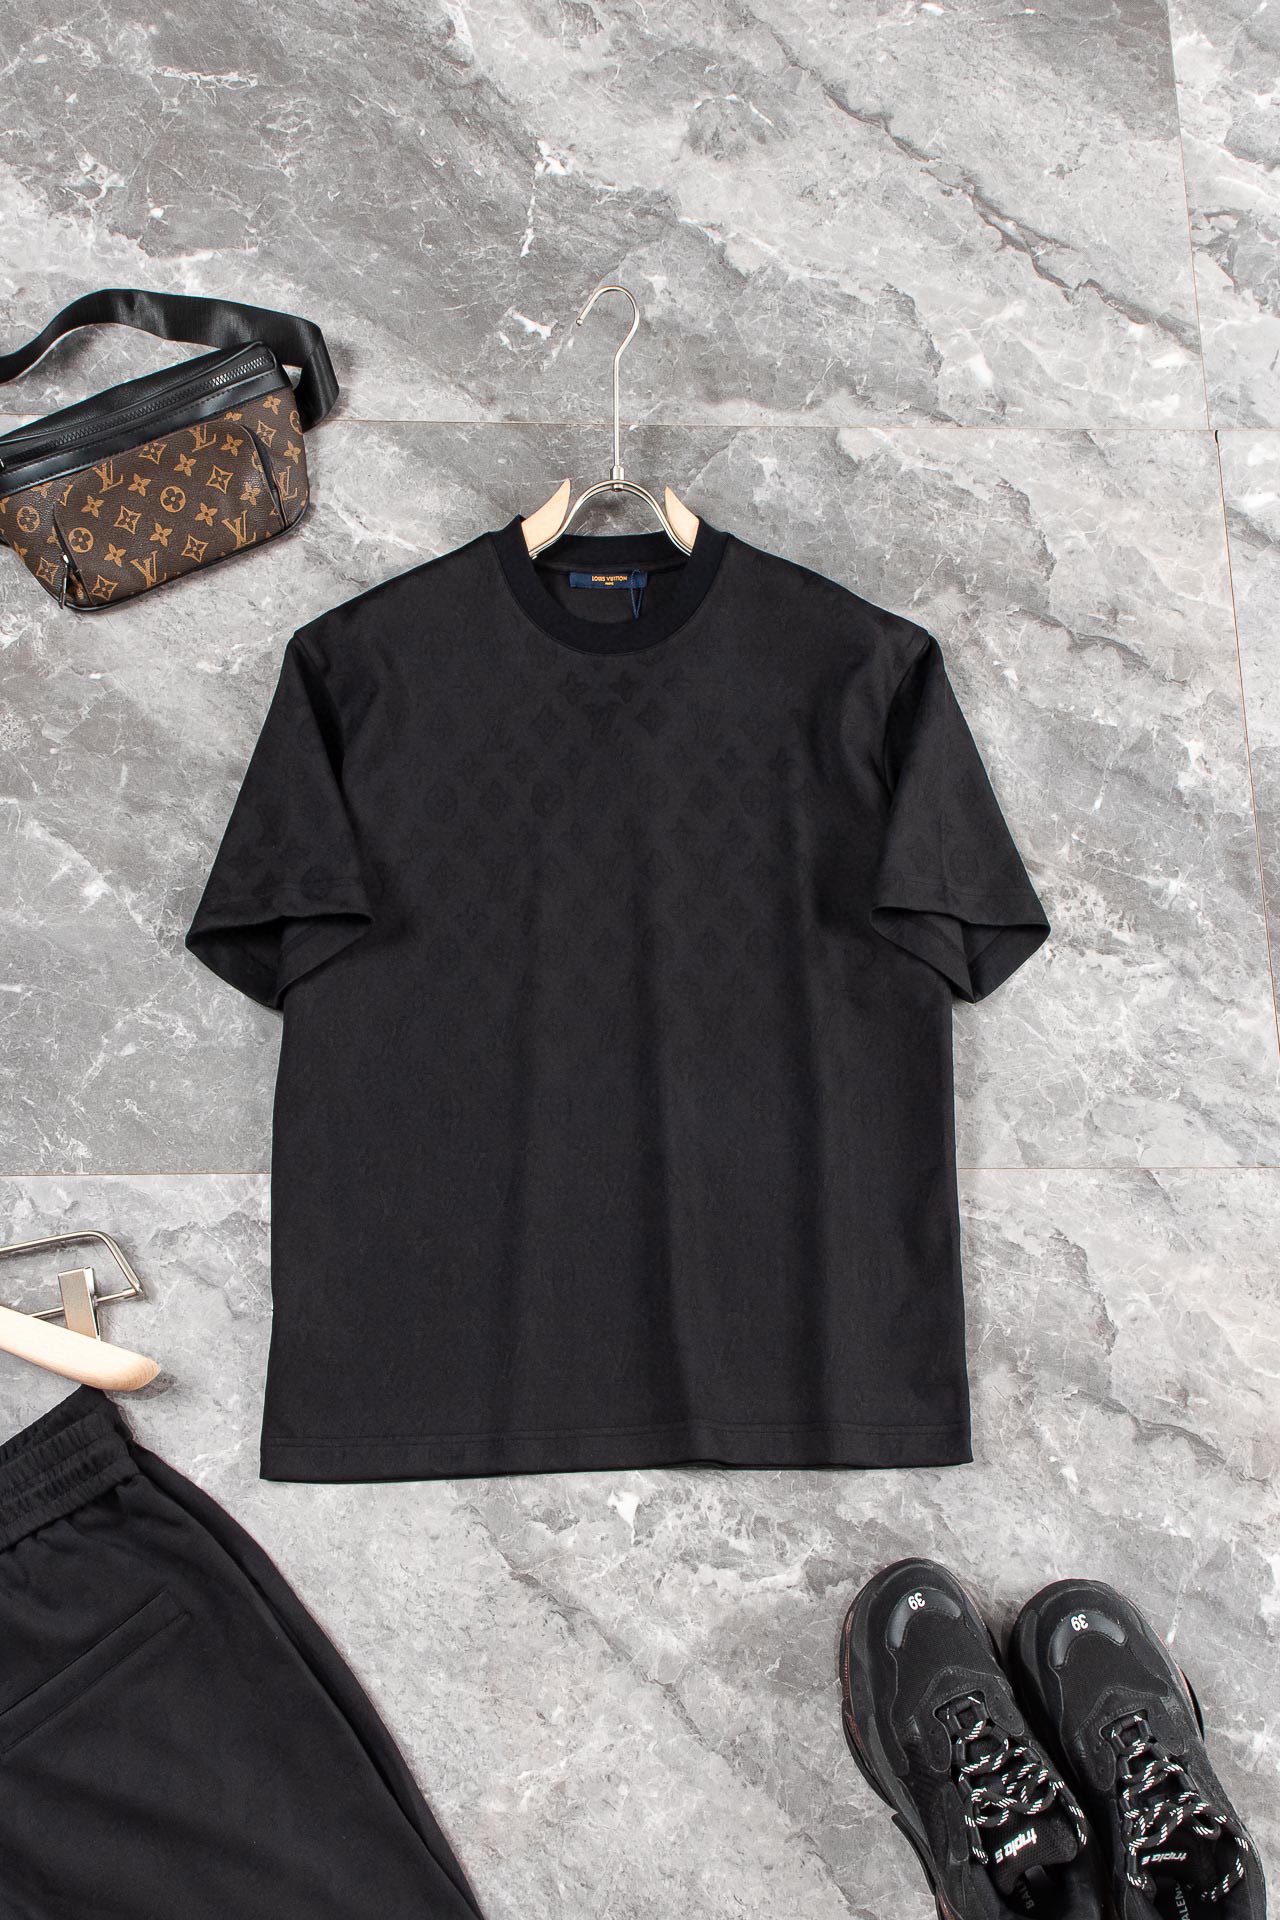 Louis Vuitton Clothing Shorts T-Shirt Black White Summer Collection Short Sleeve